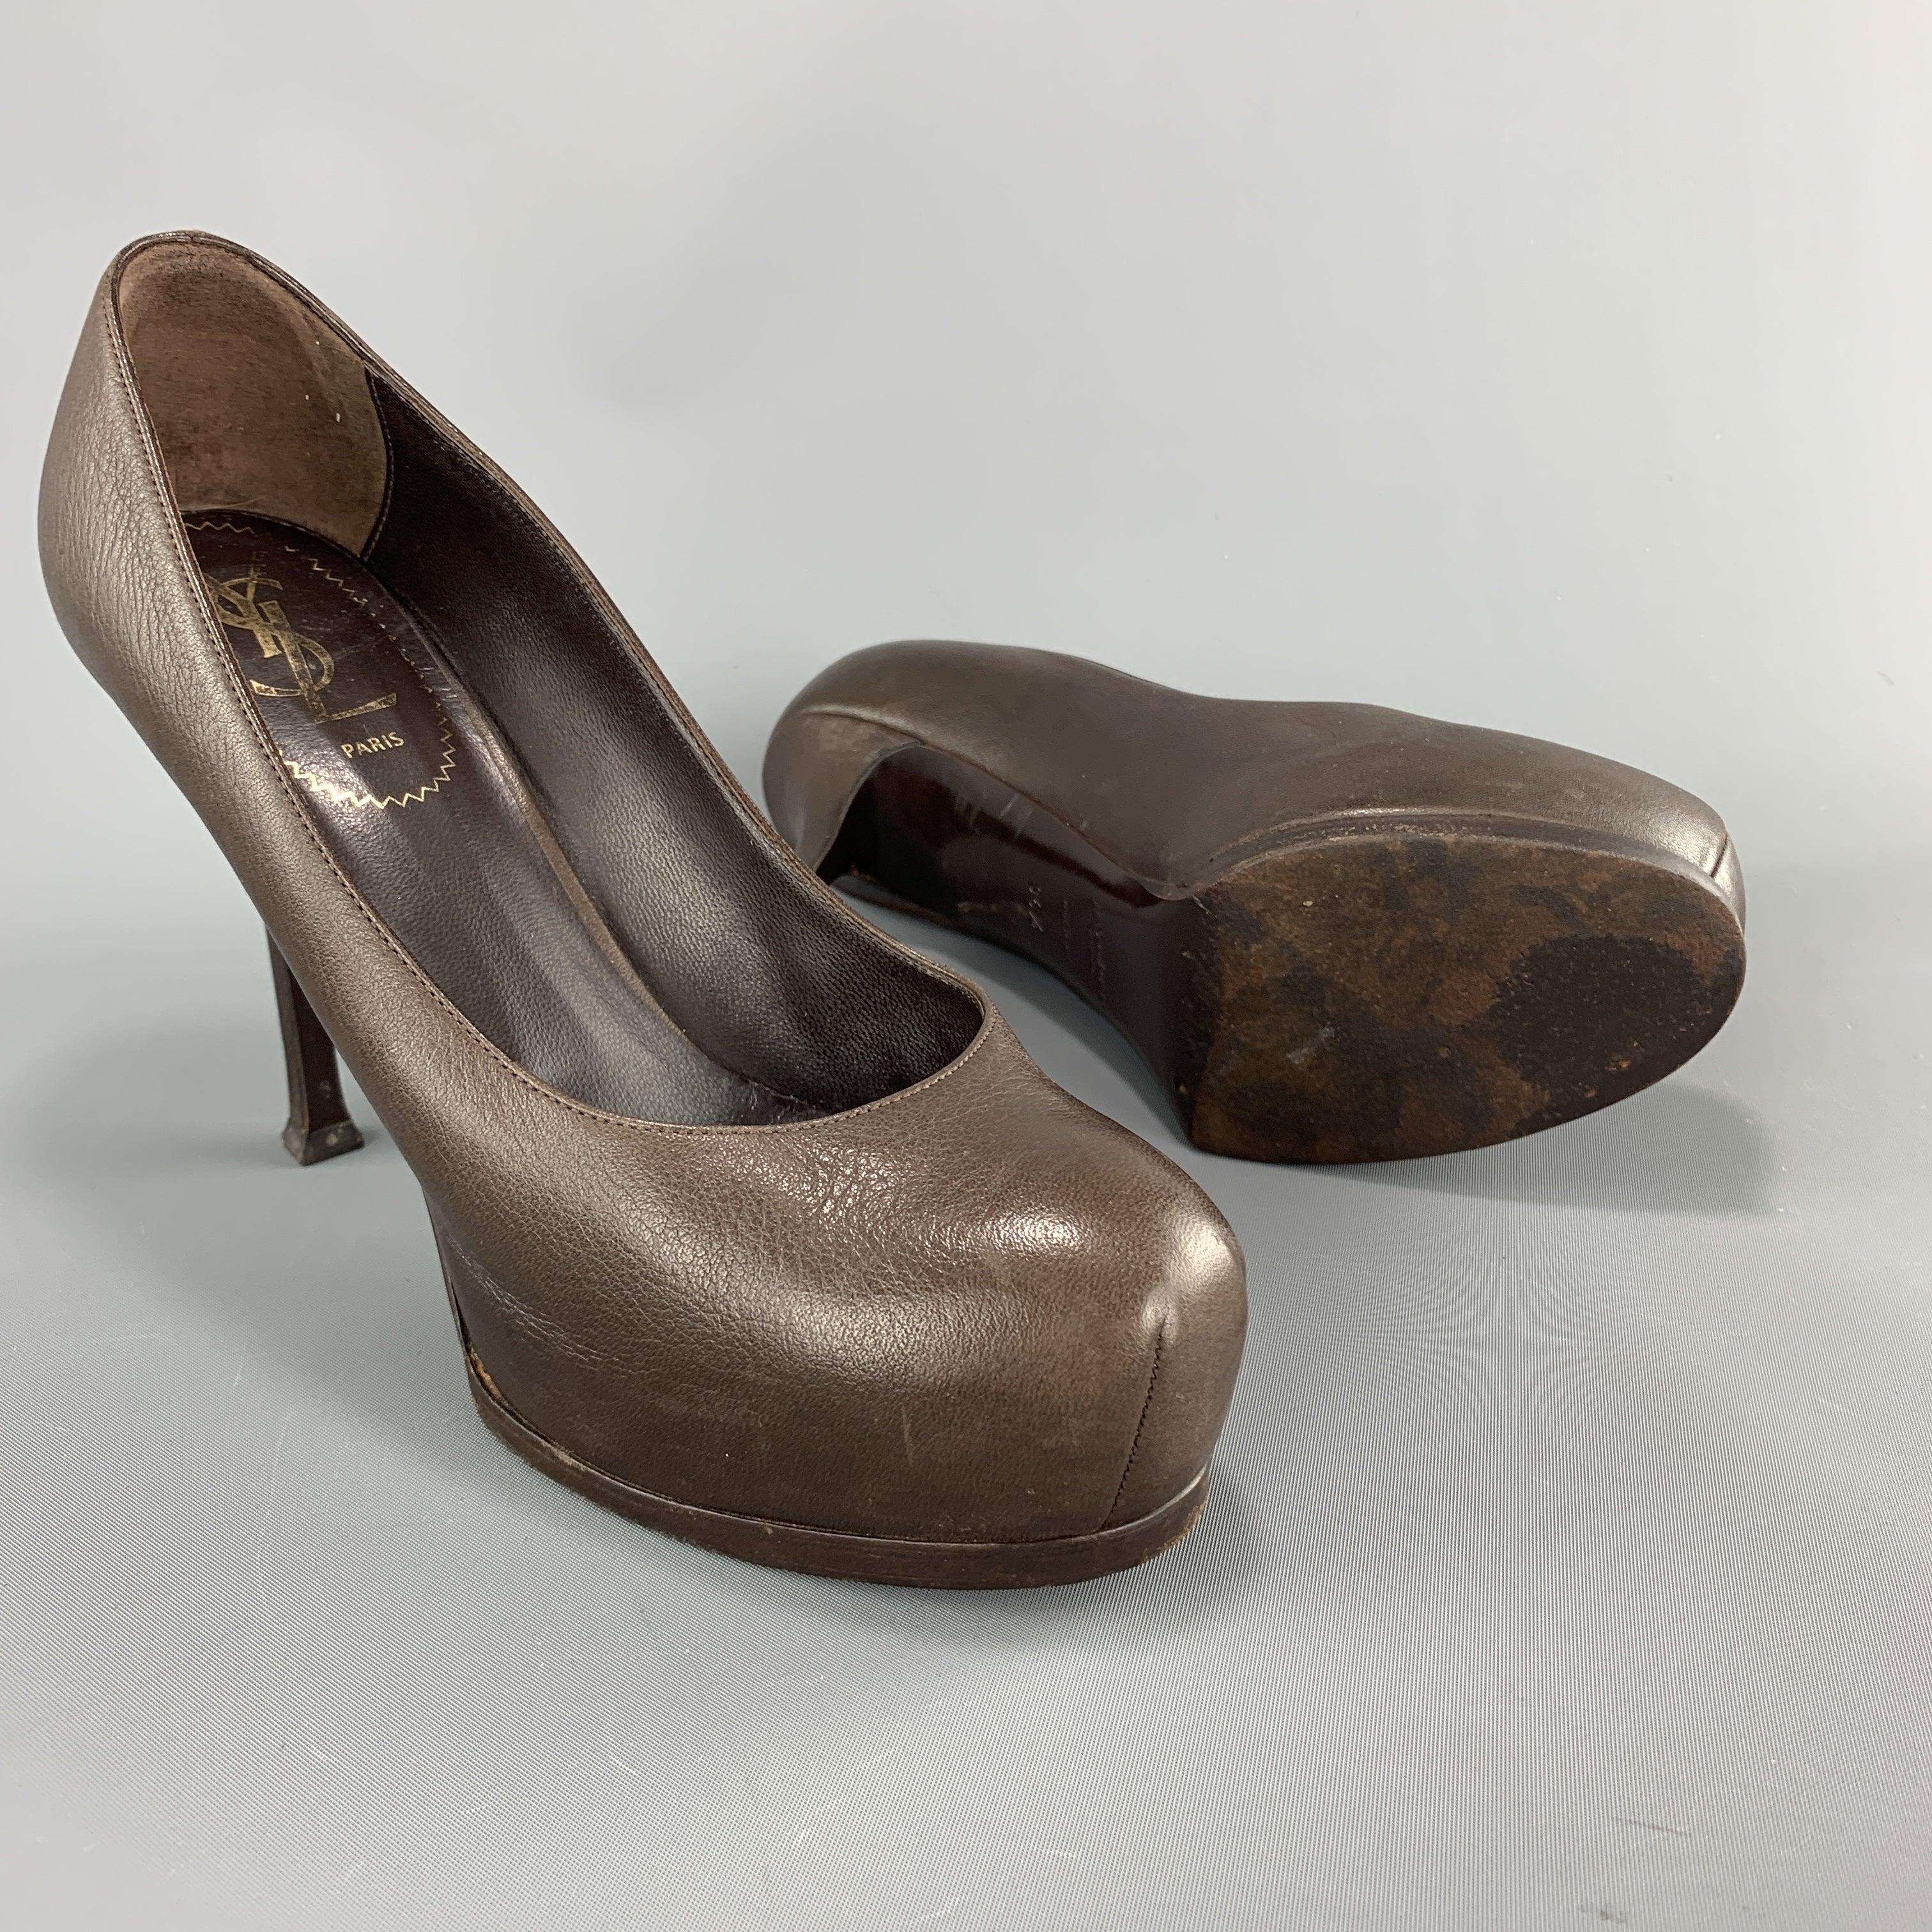 YVES SAINT LAURENT Size 6.5 Brown Leather TRIBUTE Platform Pumps In Good Condition For Sale In San Francisco, CA